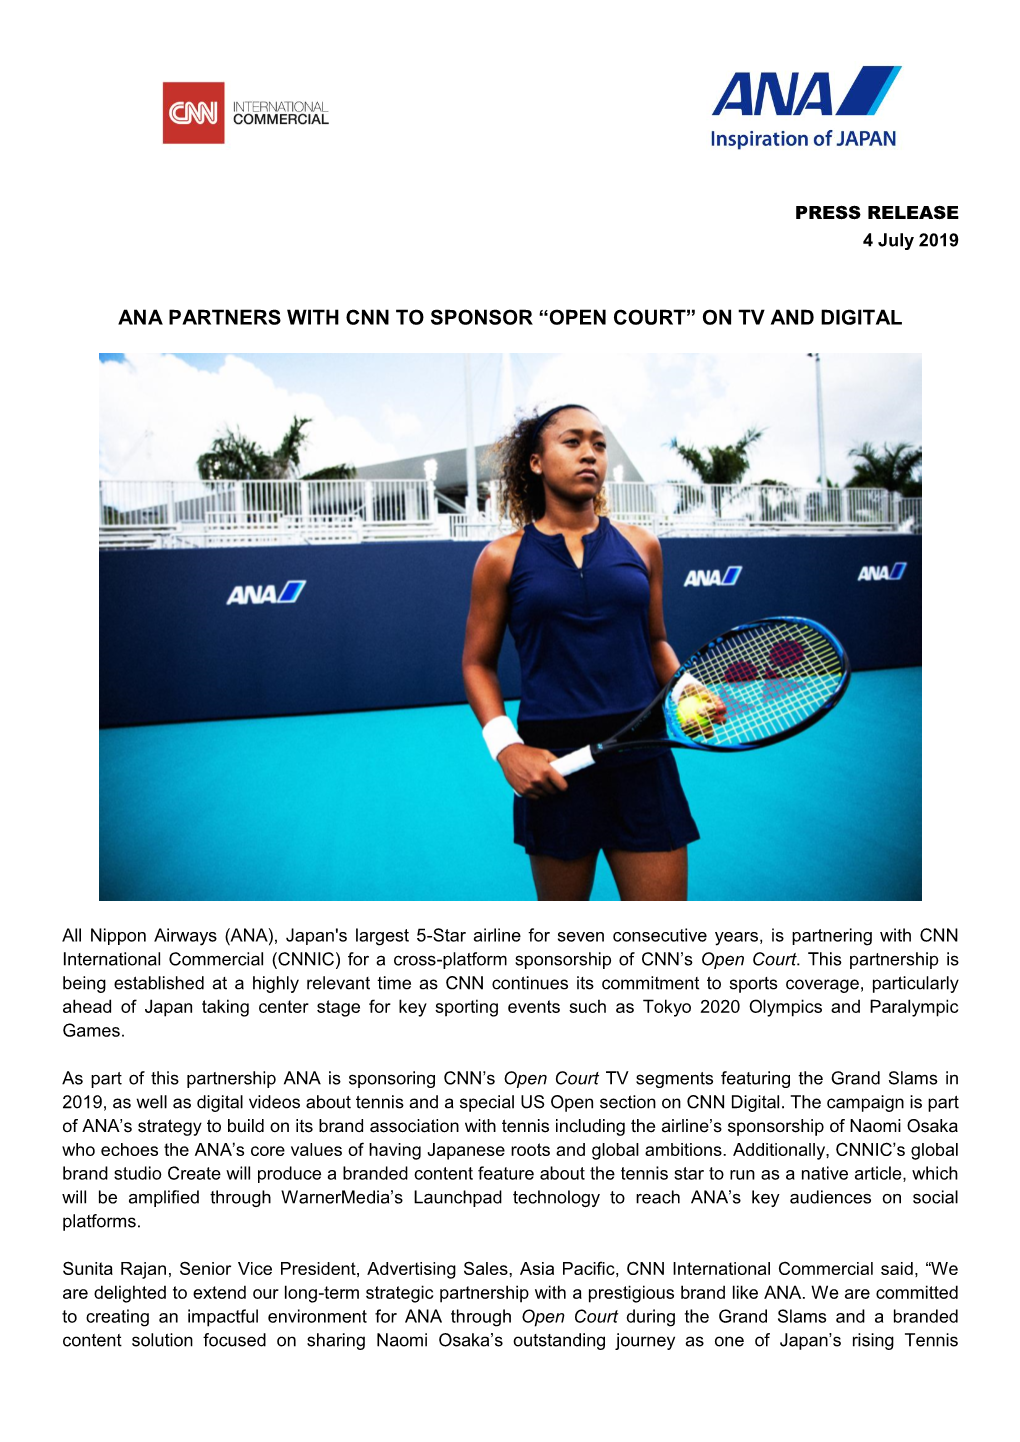 Ana Partners with Cnn to Sponsor “Open Court” on Tv and Digital